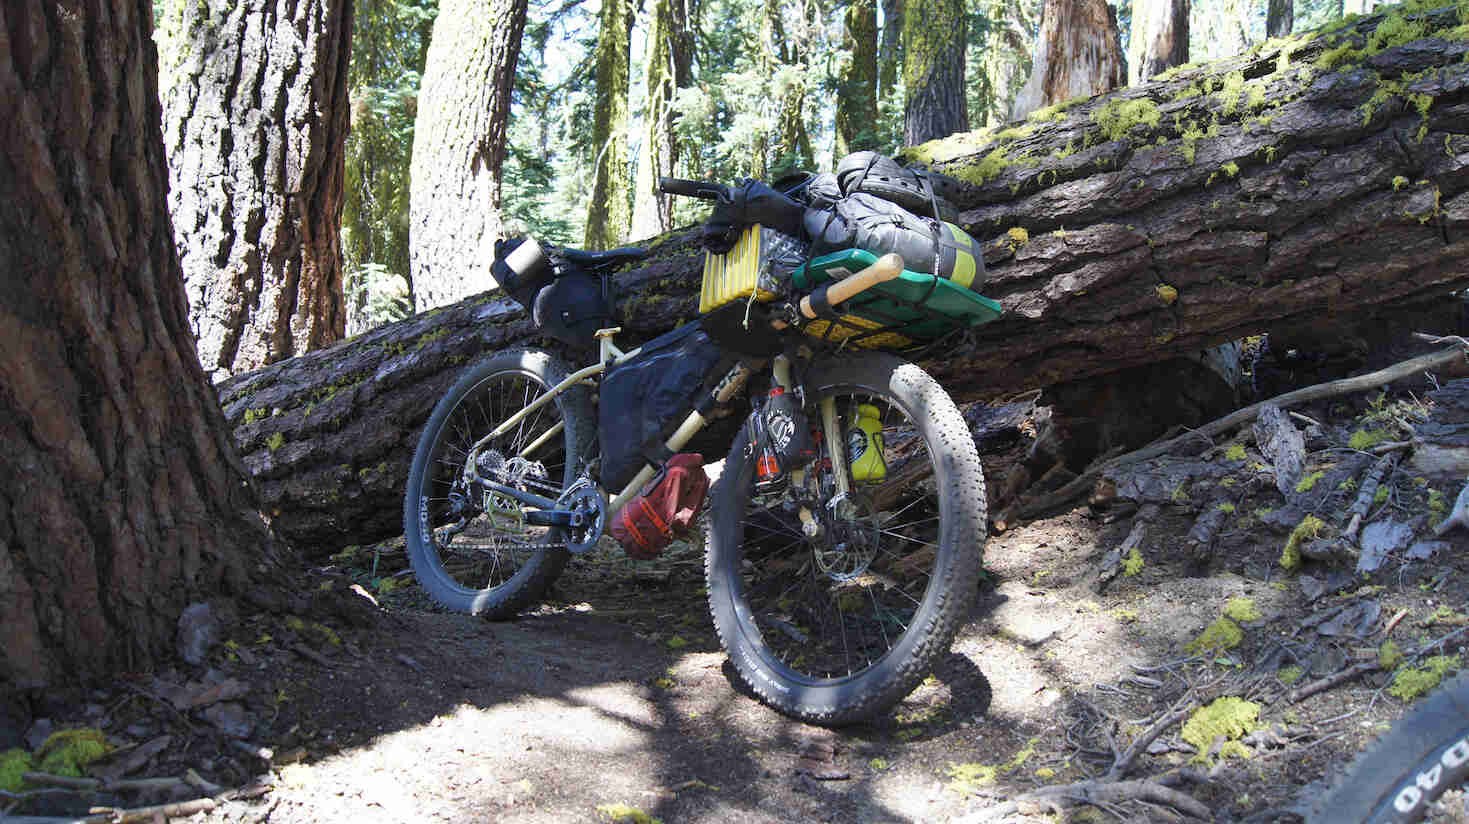 Front left view of Surly bike, loaded with gear, with a downed tree laying across a forest trail in the background